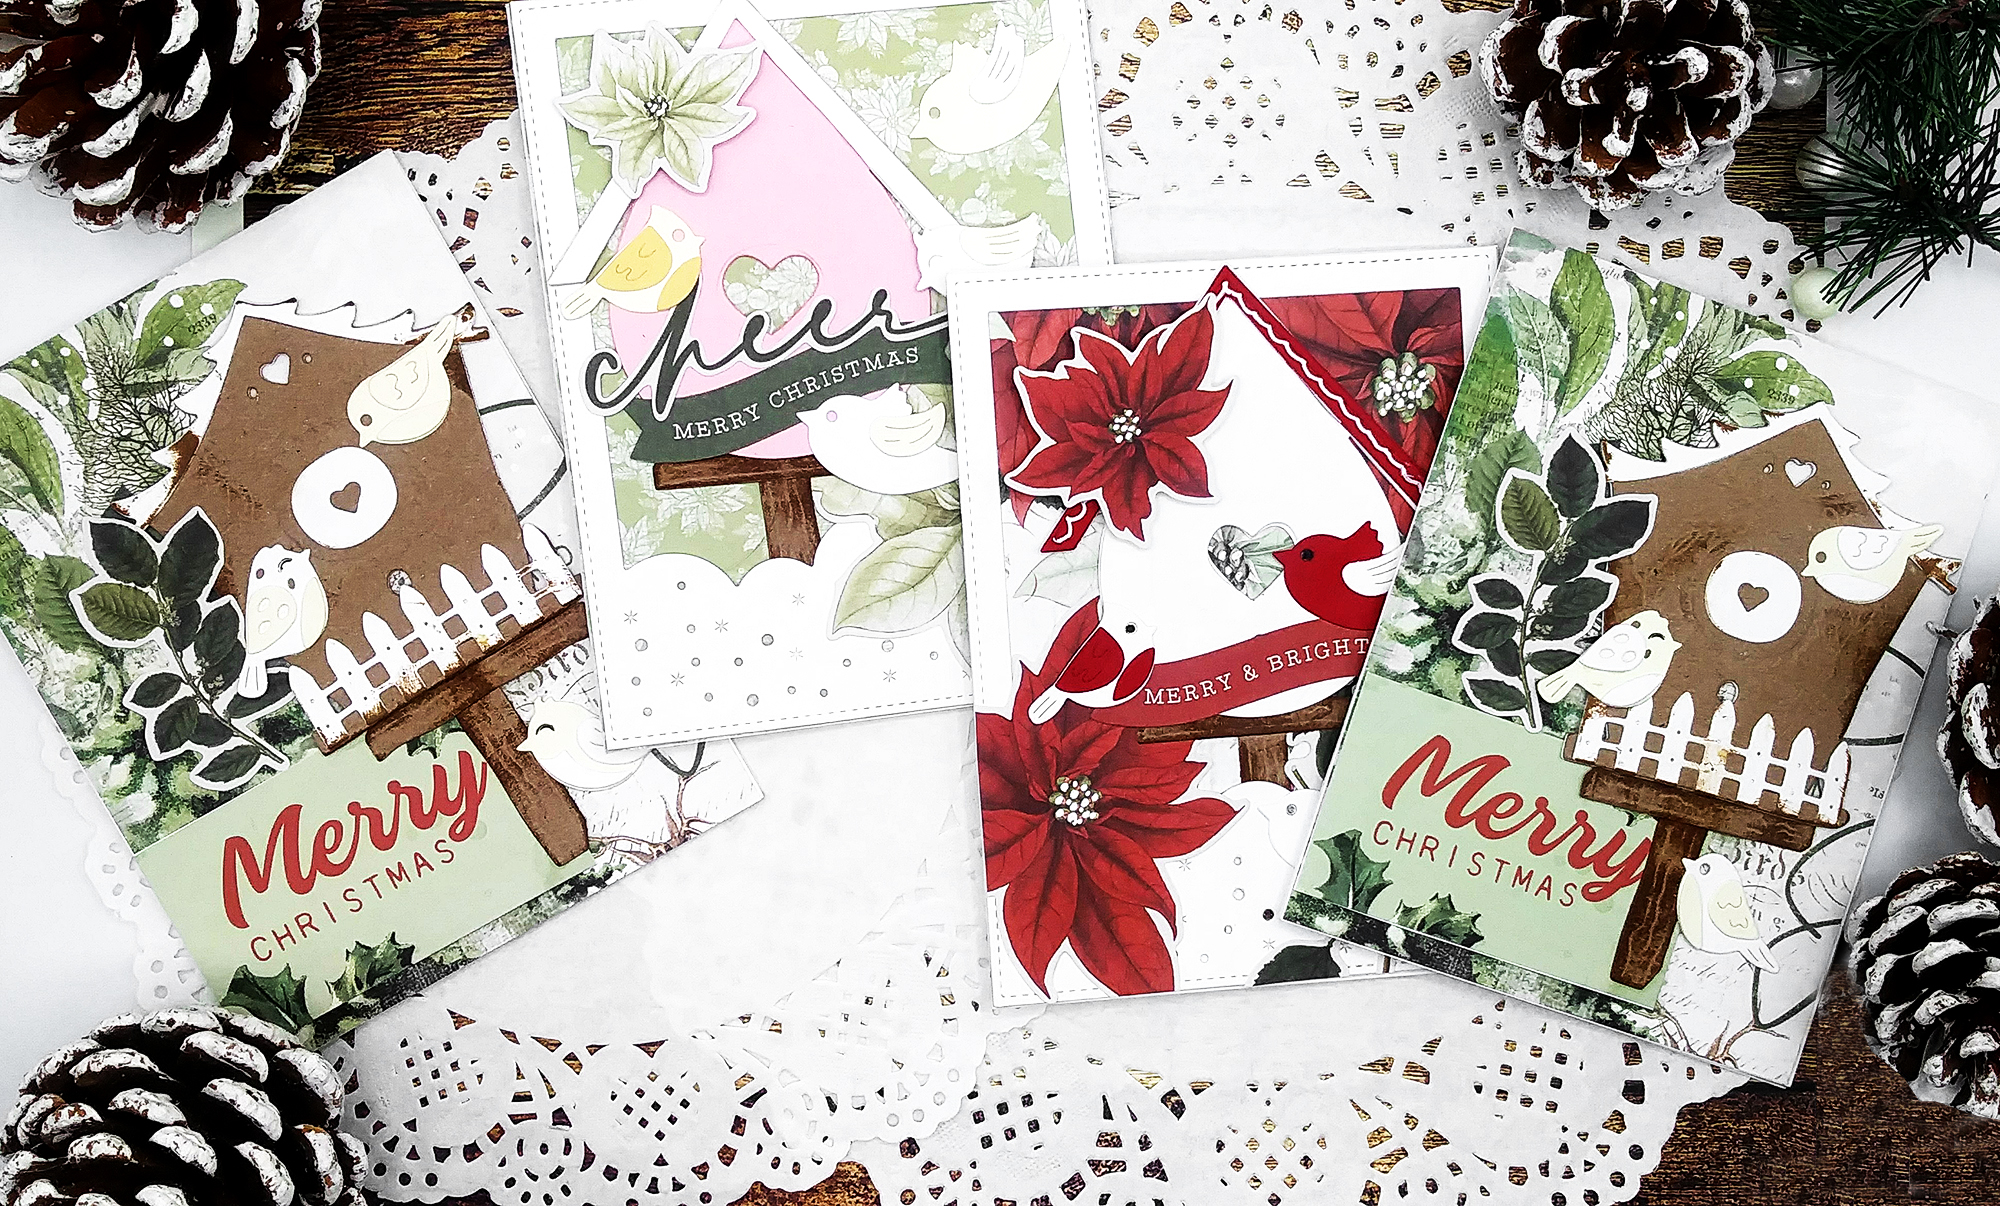 Christmas Cards with Spellbinders Birdhouses through the Seasons by Vicky Papaioannou